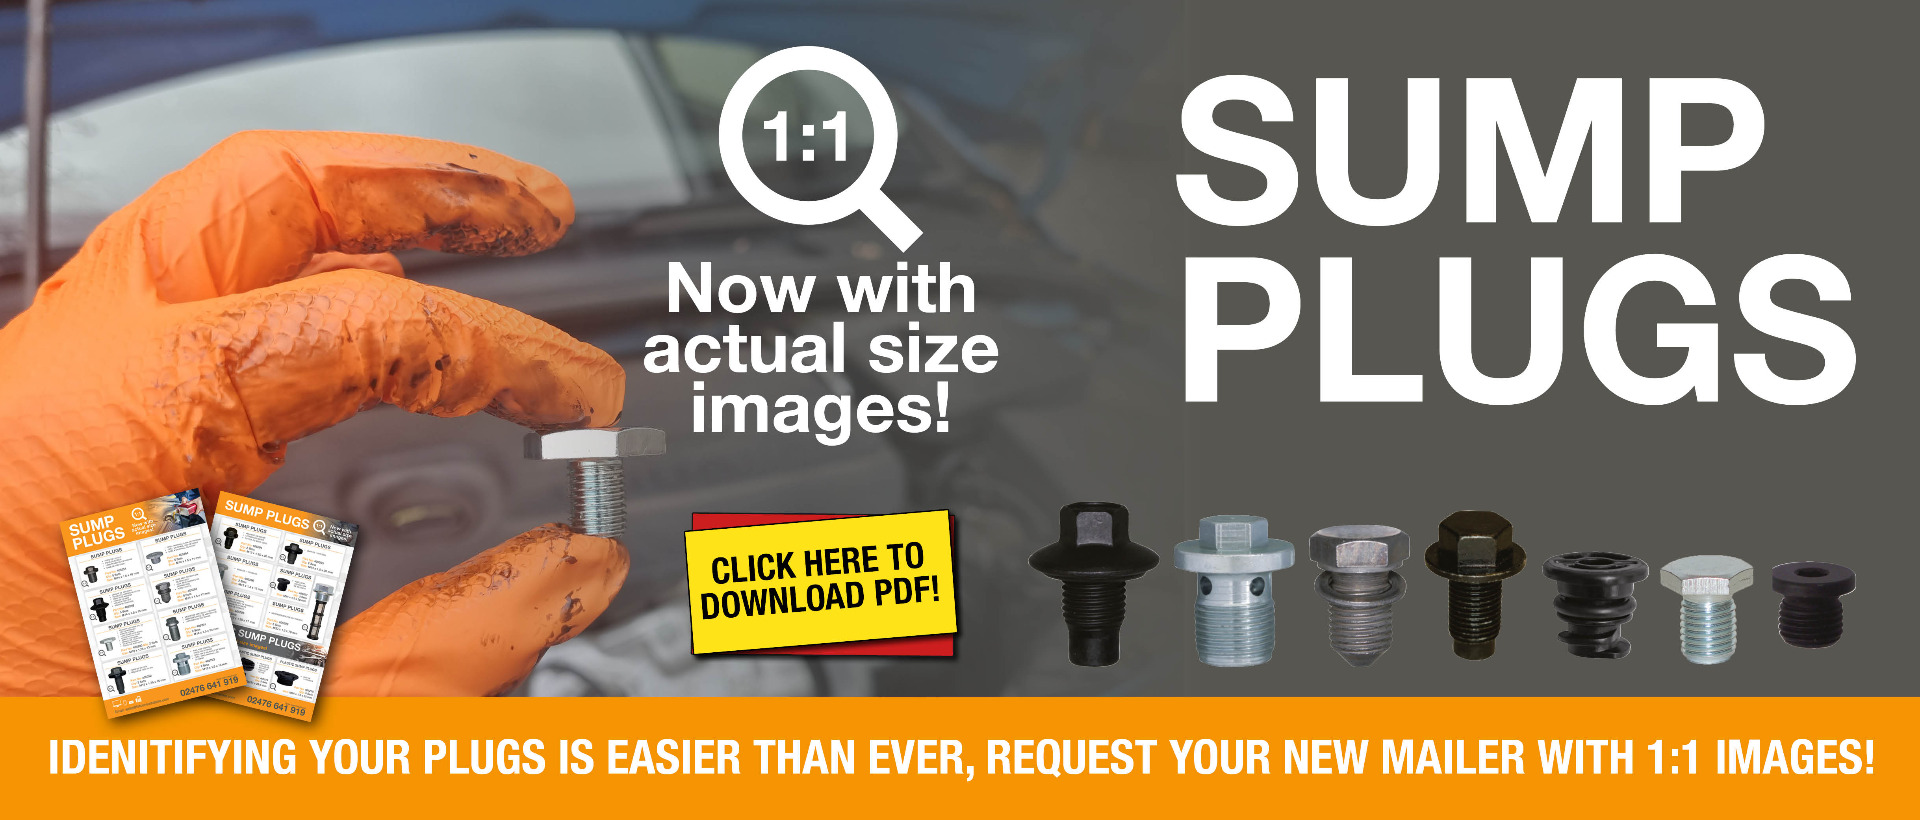 Sump Plugs - 1:1 Now With Actual Size Images! Identifying your plugs is easier than ever, request your new mailer with 1:1 images! Click here to download PDF!